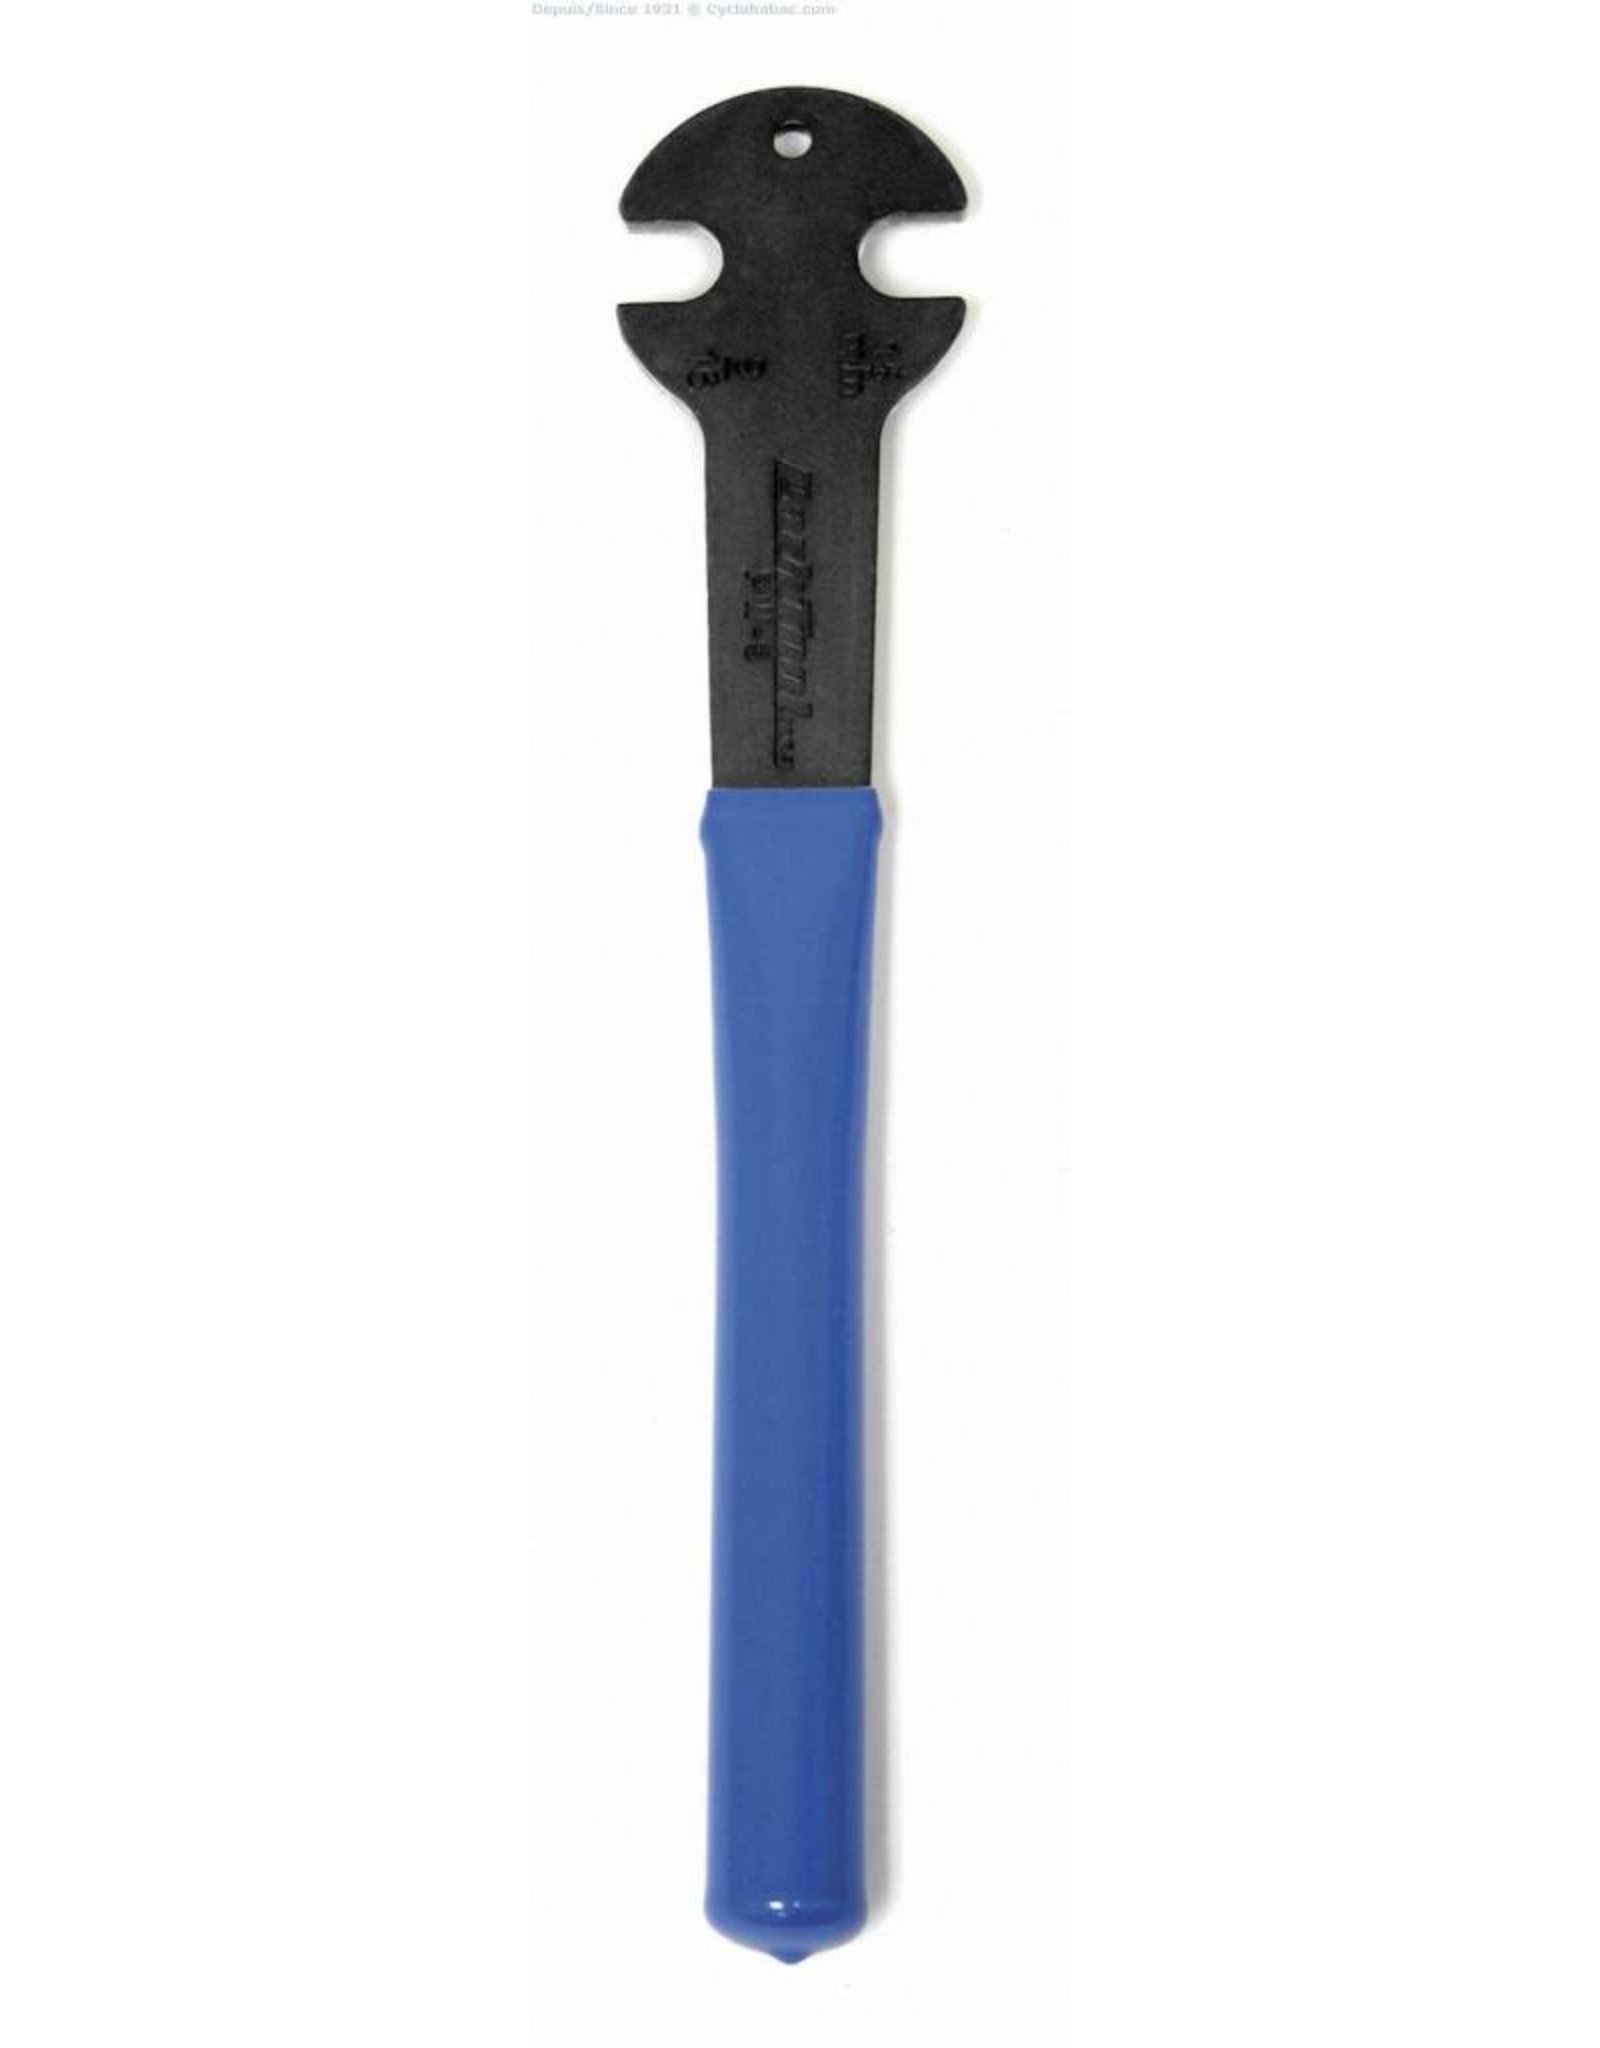 Park tool PW-3 Pedal Wrench